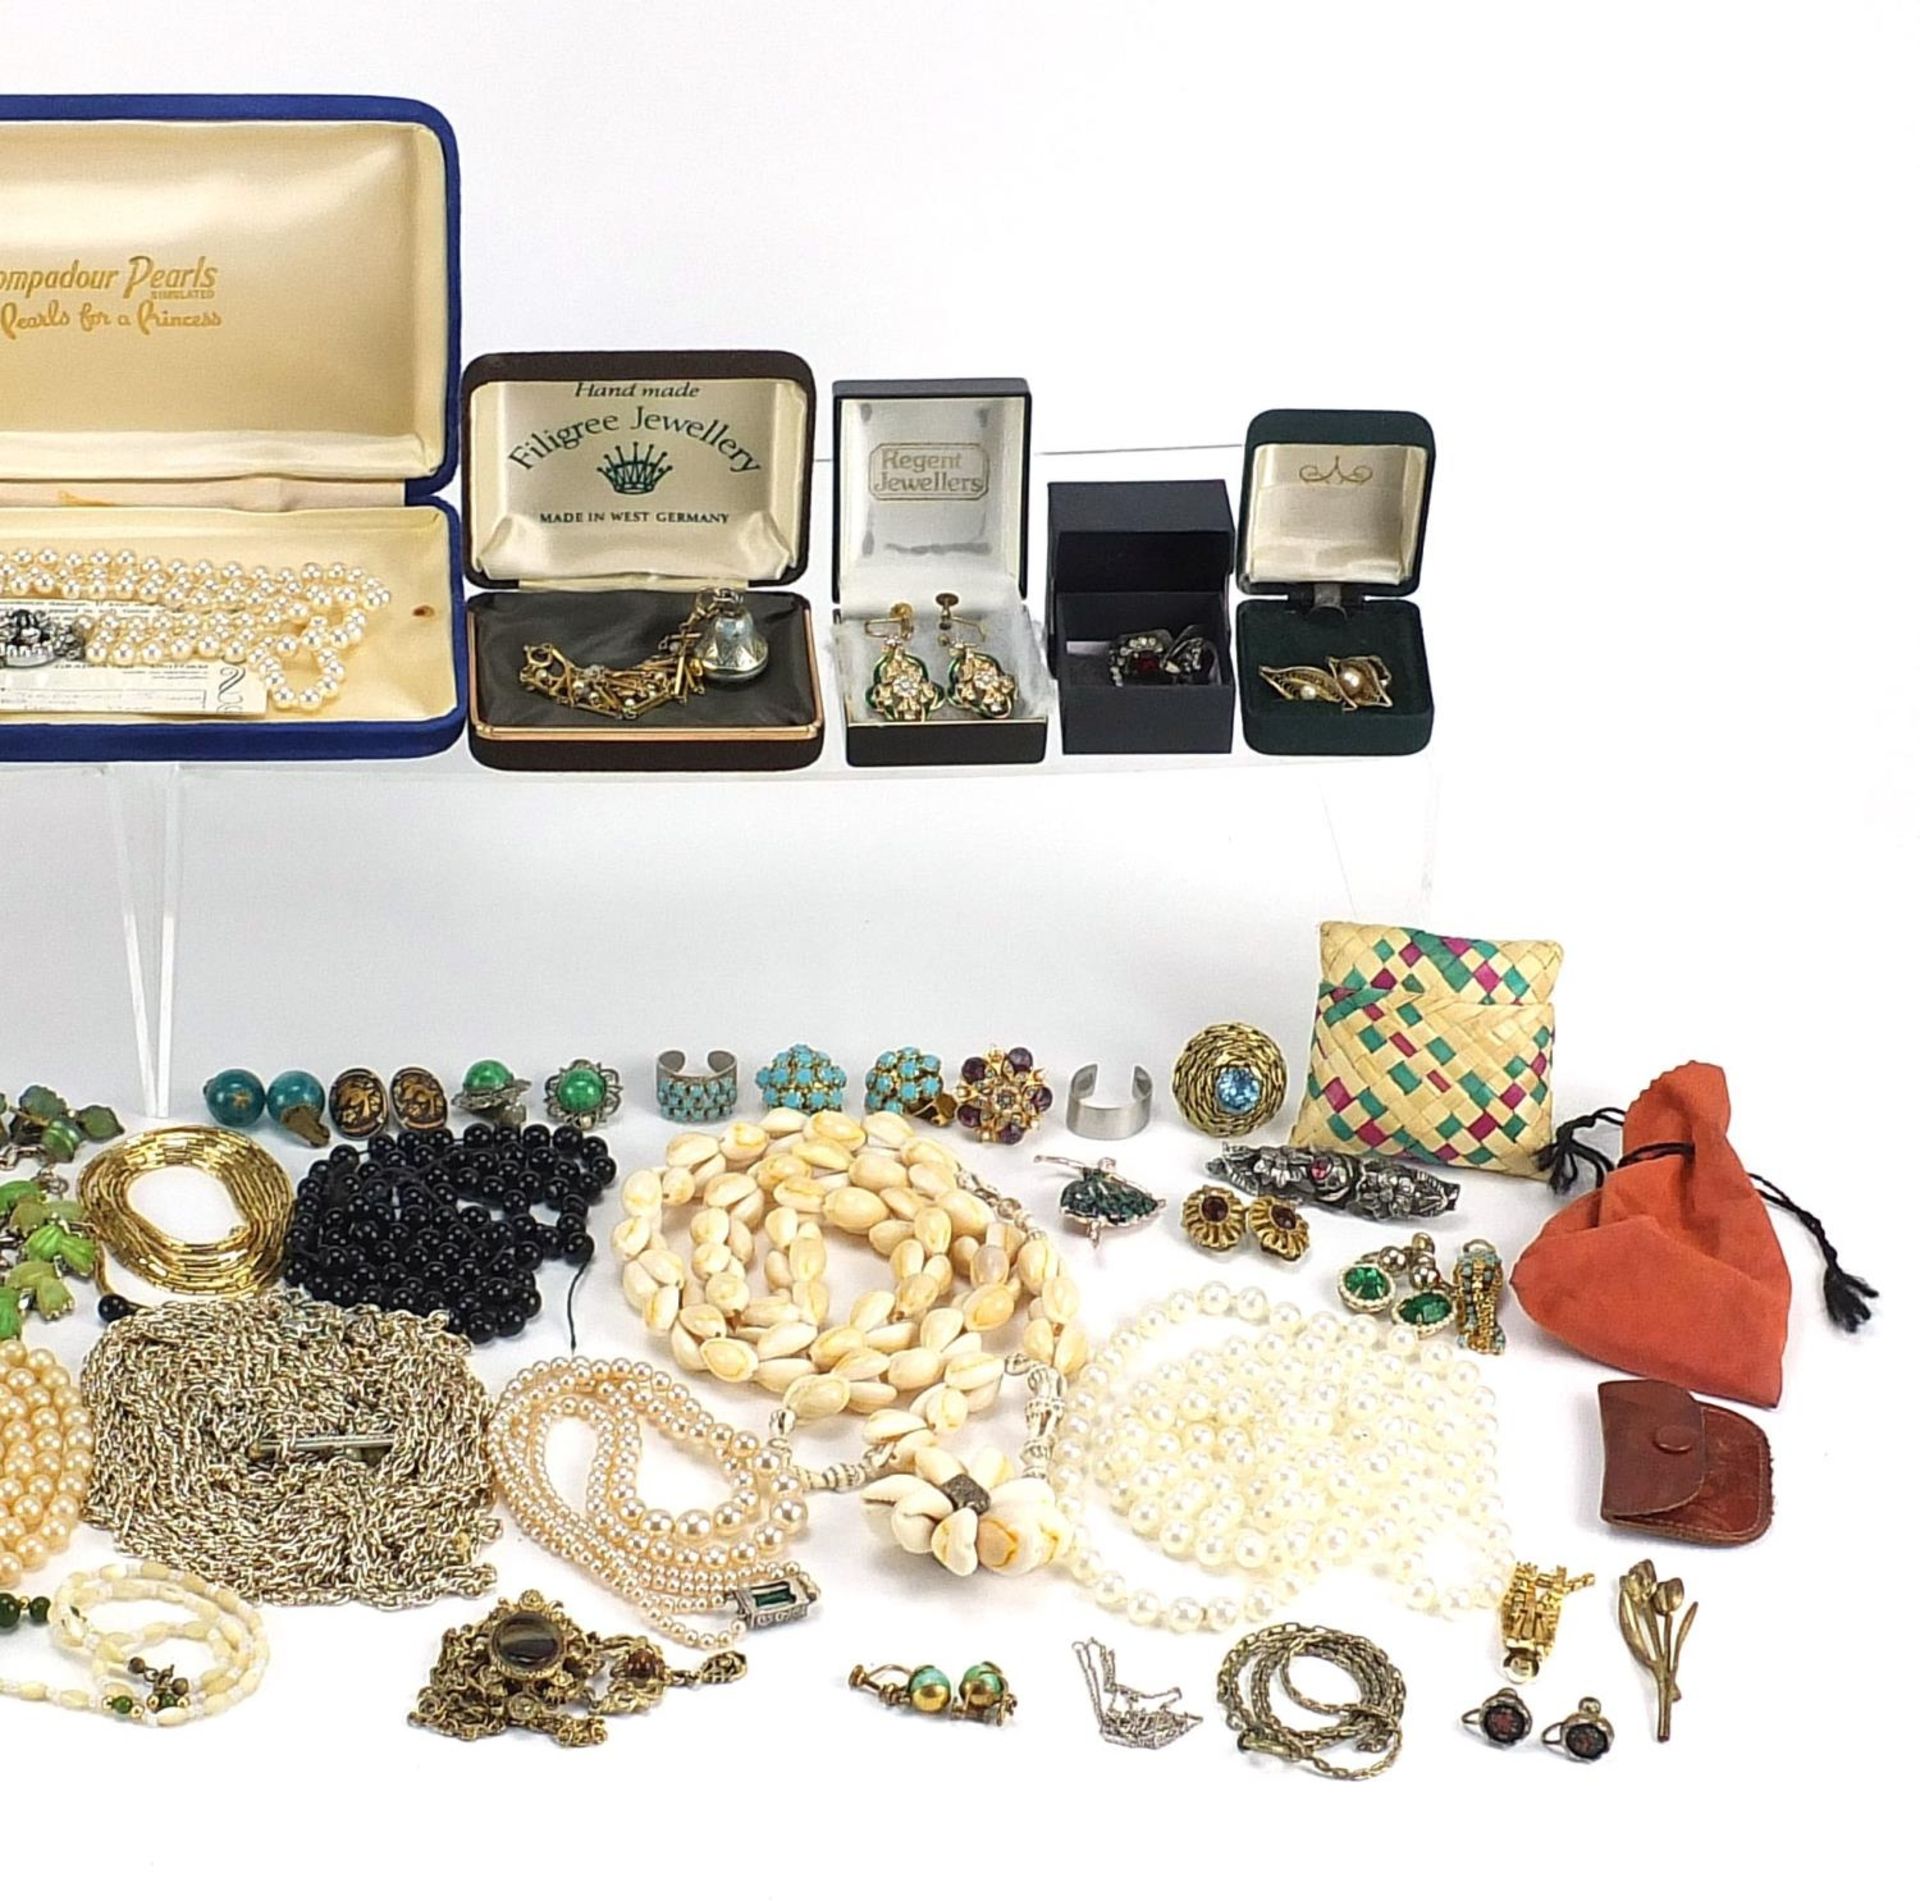 Vintage and later jewellery including simulated pearl necklaces, wristwatches, earrings and brooches - Image 3 of 3